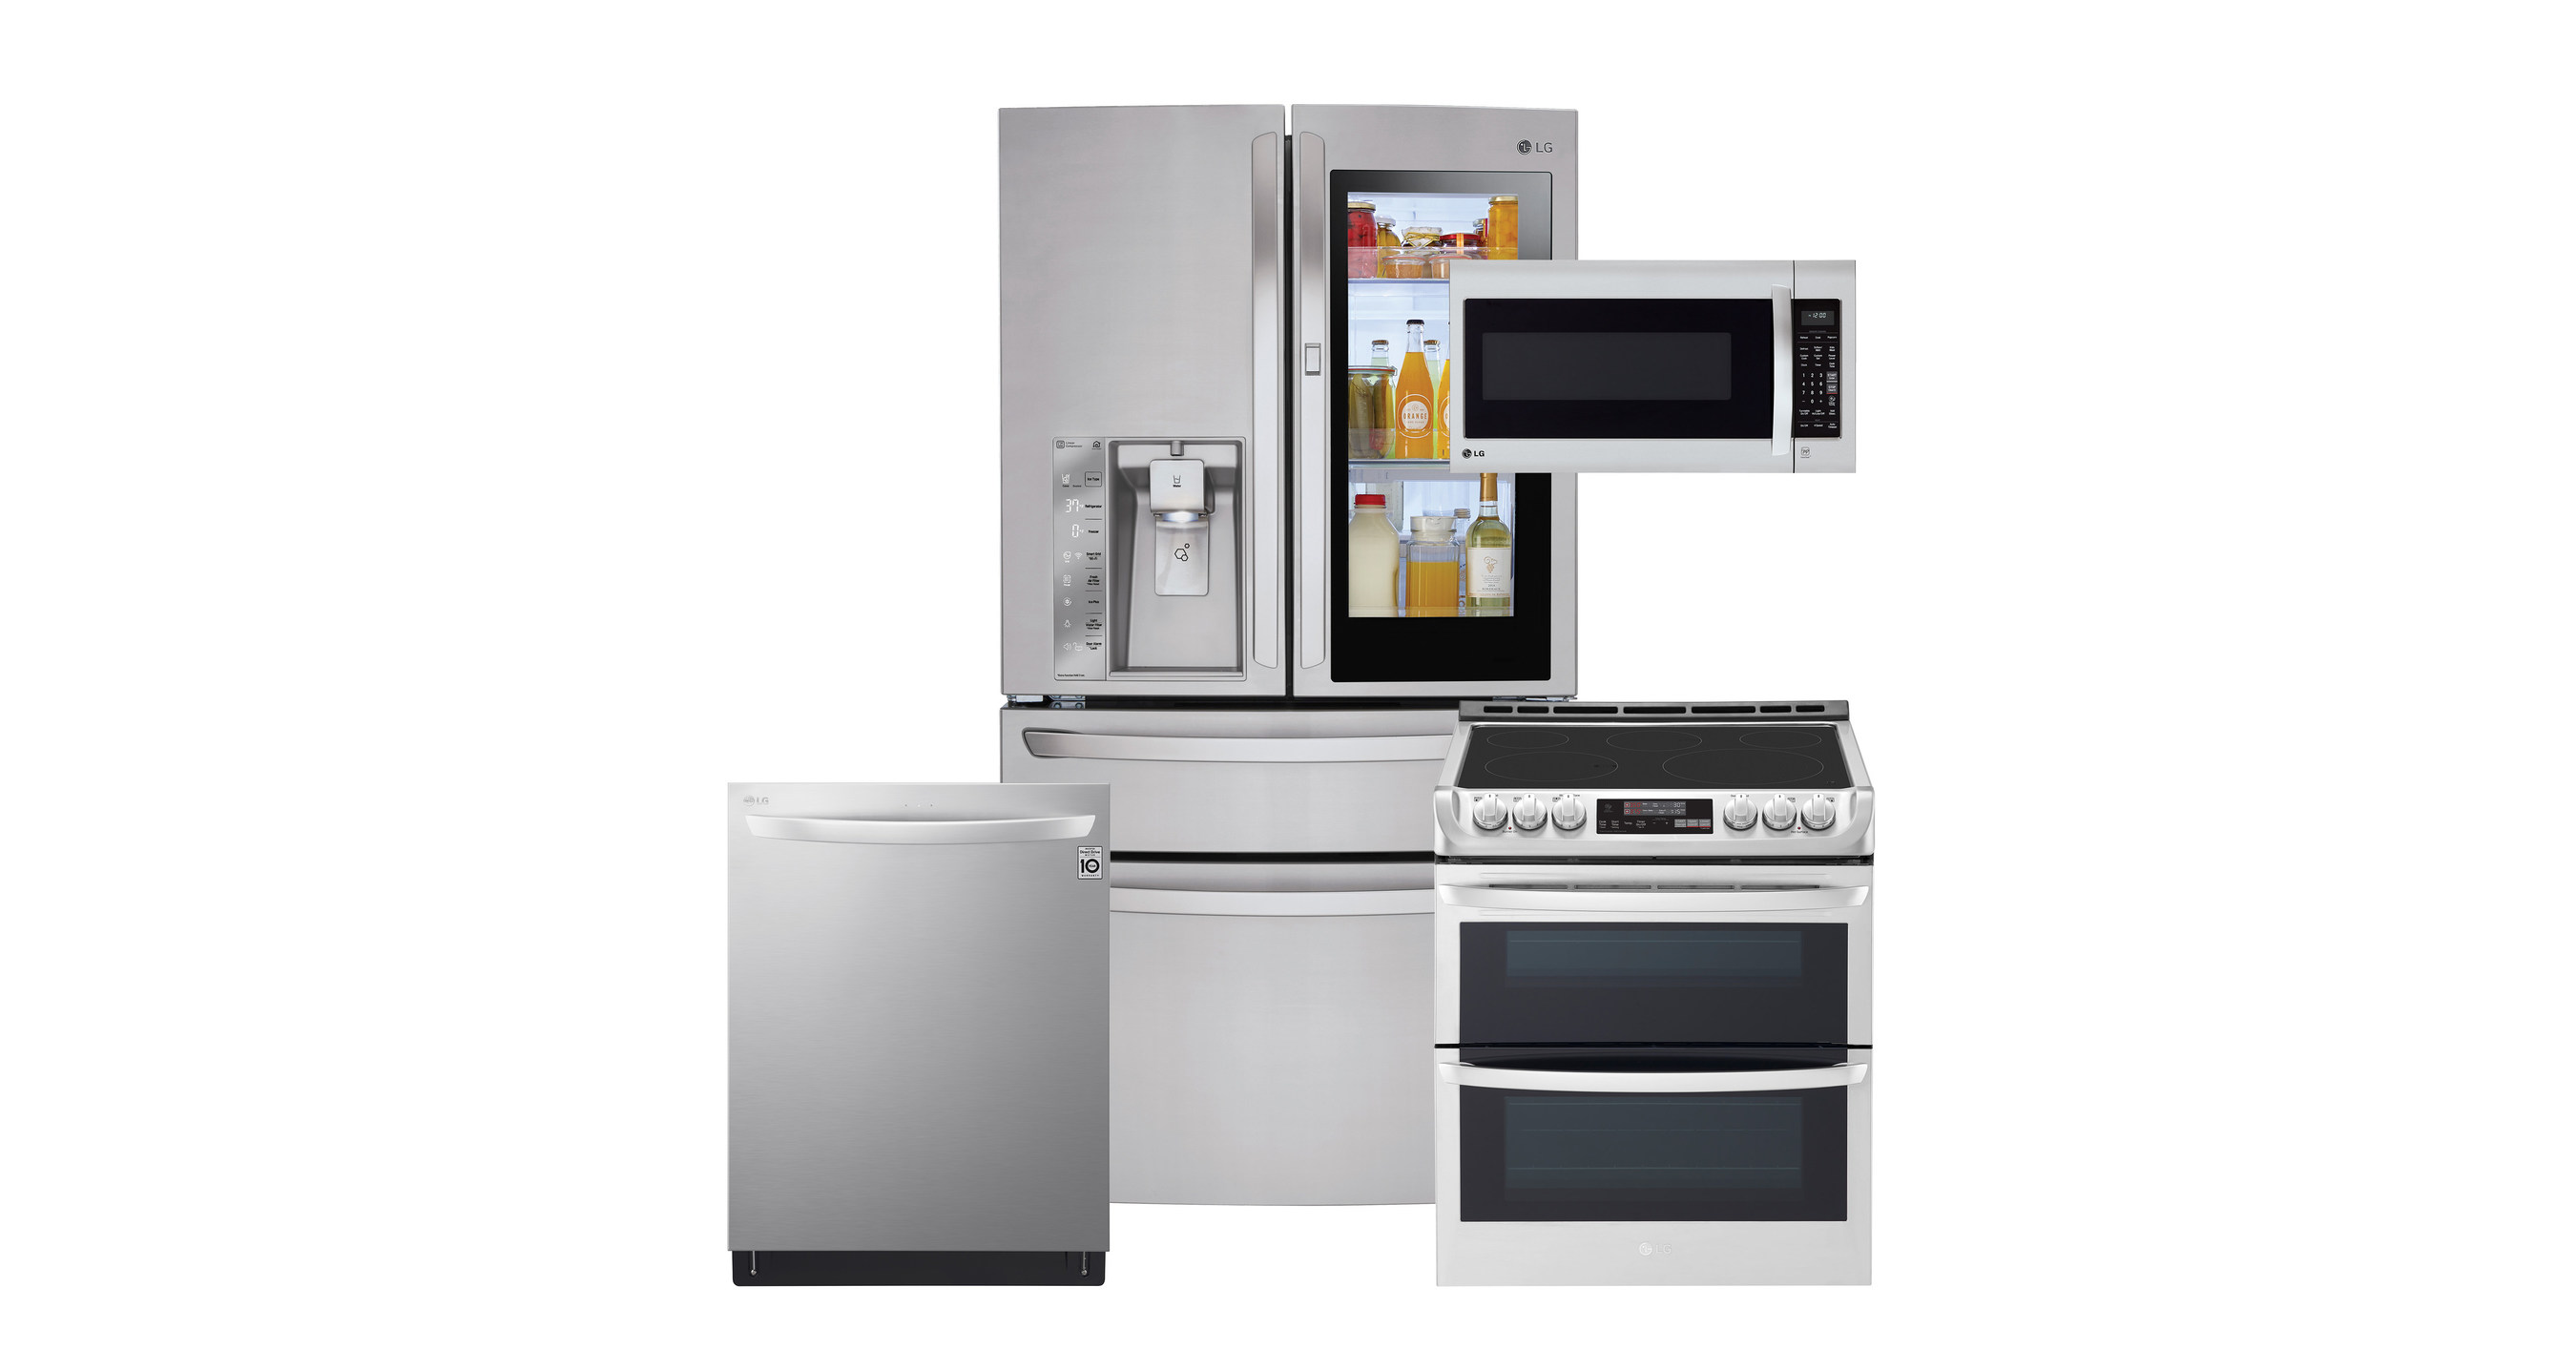 US Consumers Rate LG Home Appliances 1 In Customer Satisfaction